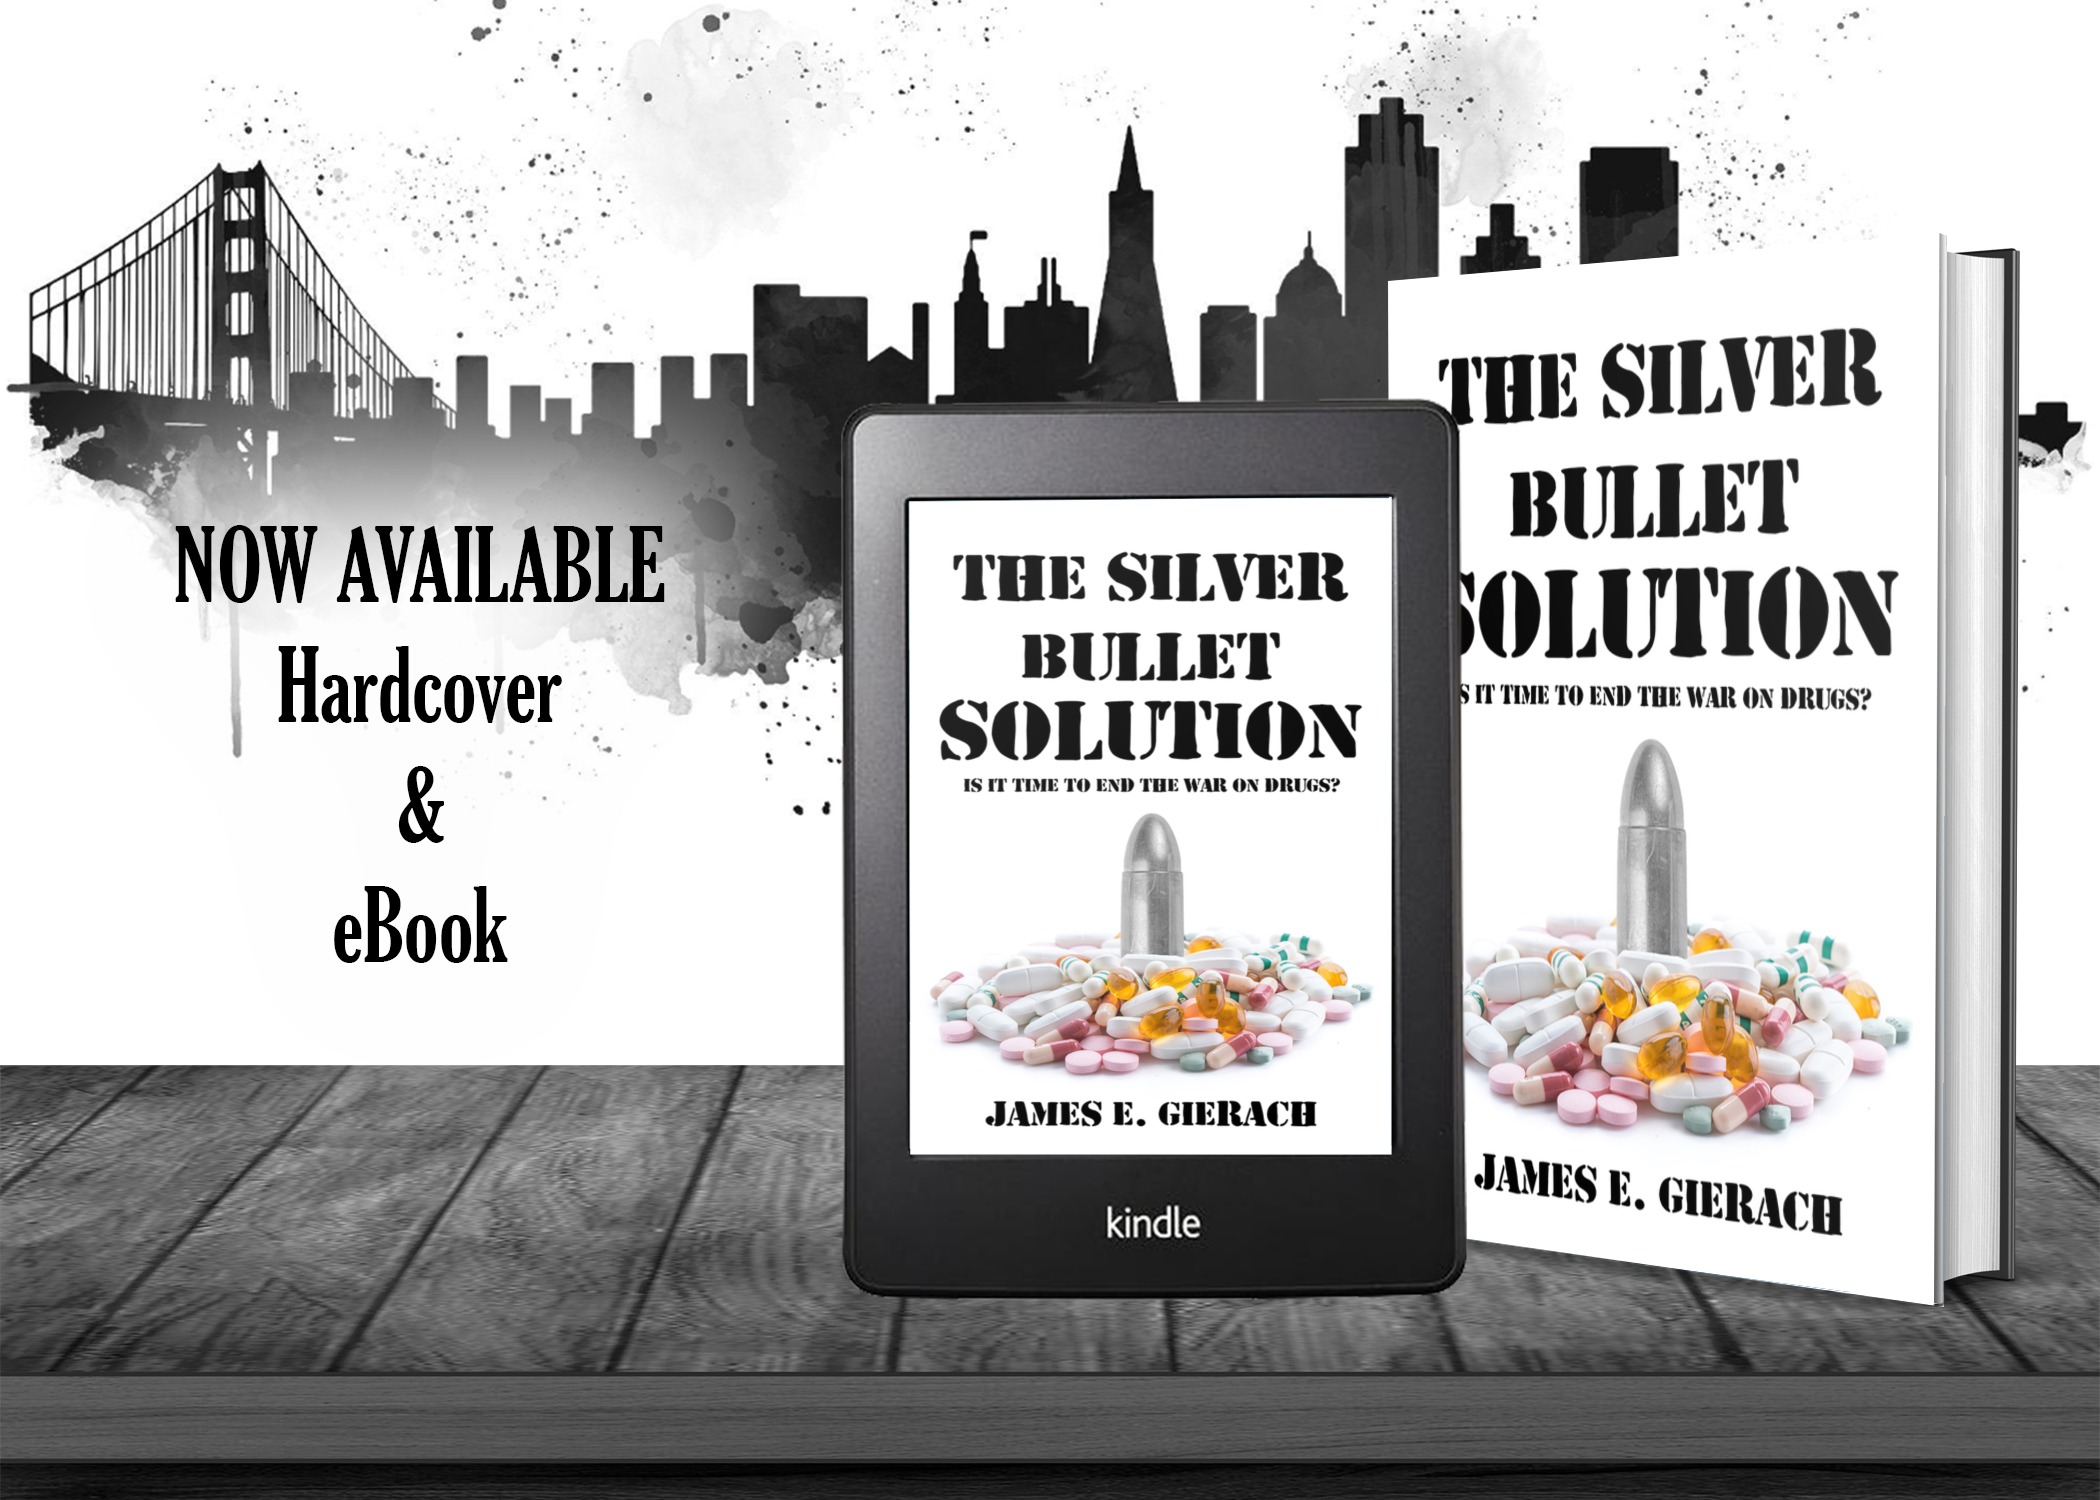 The Silver Bullet Solution: Is it time to end the War on Drugs? by James E. Gierach, now available from Histria Books